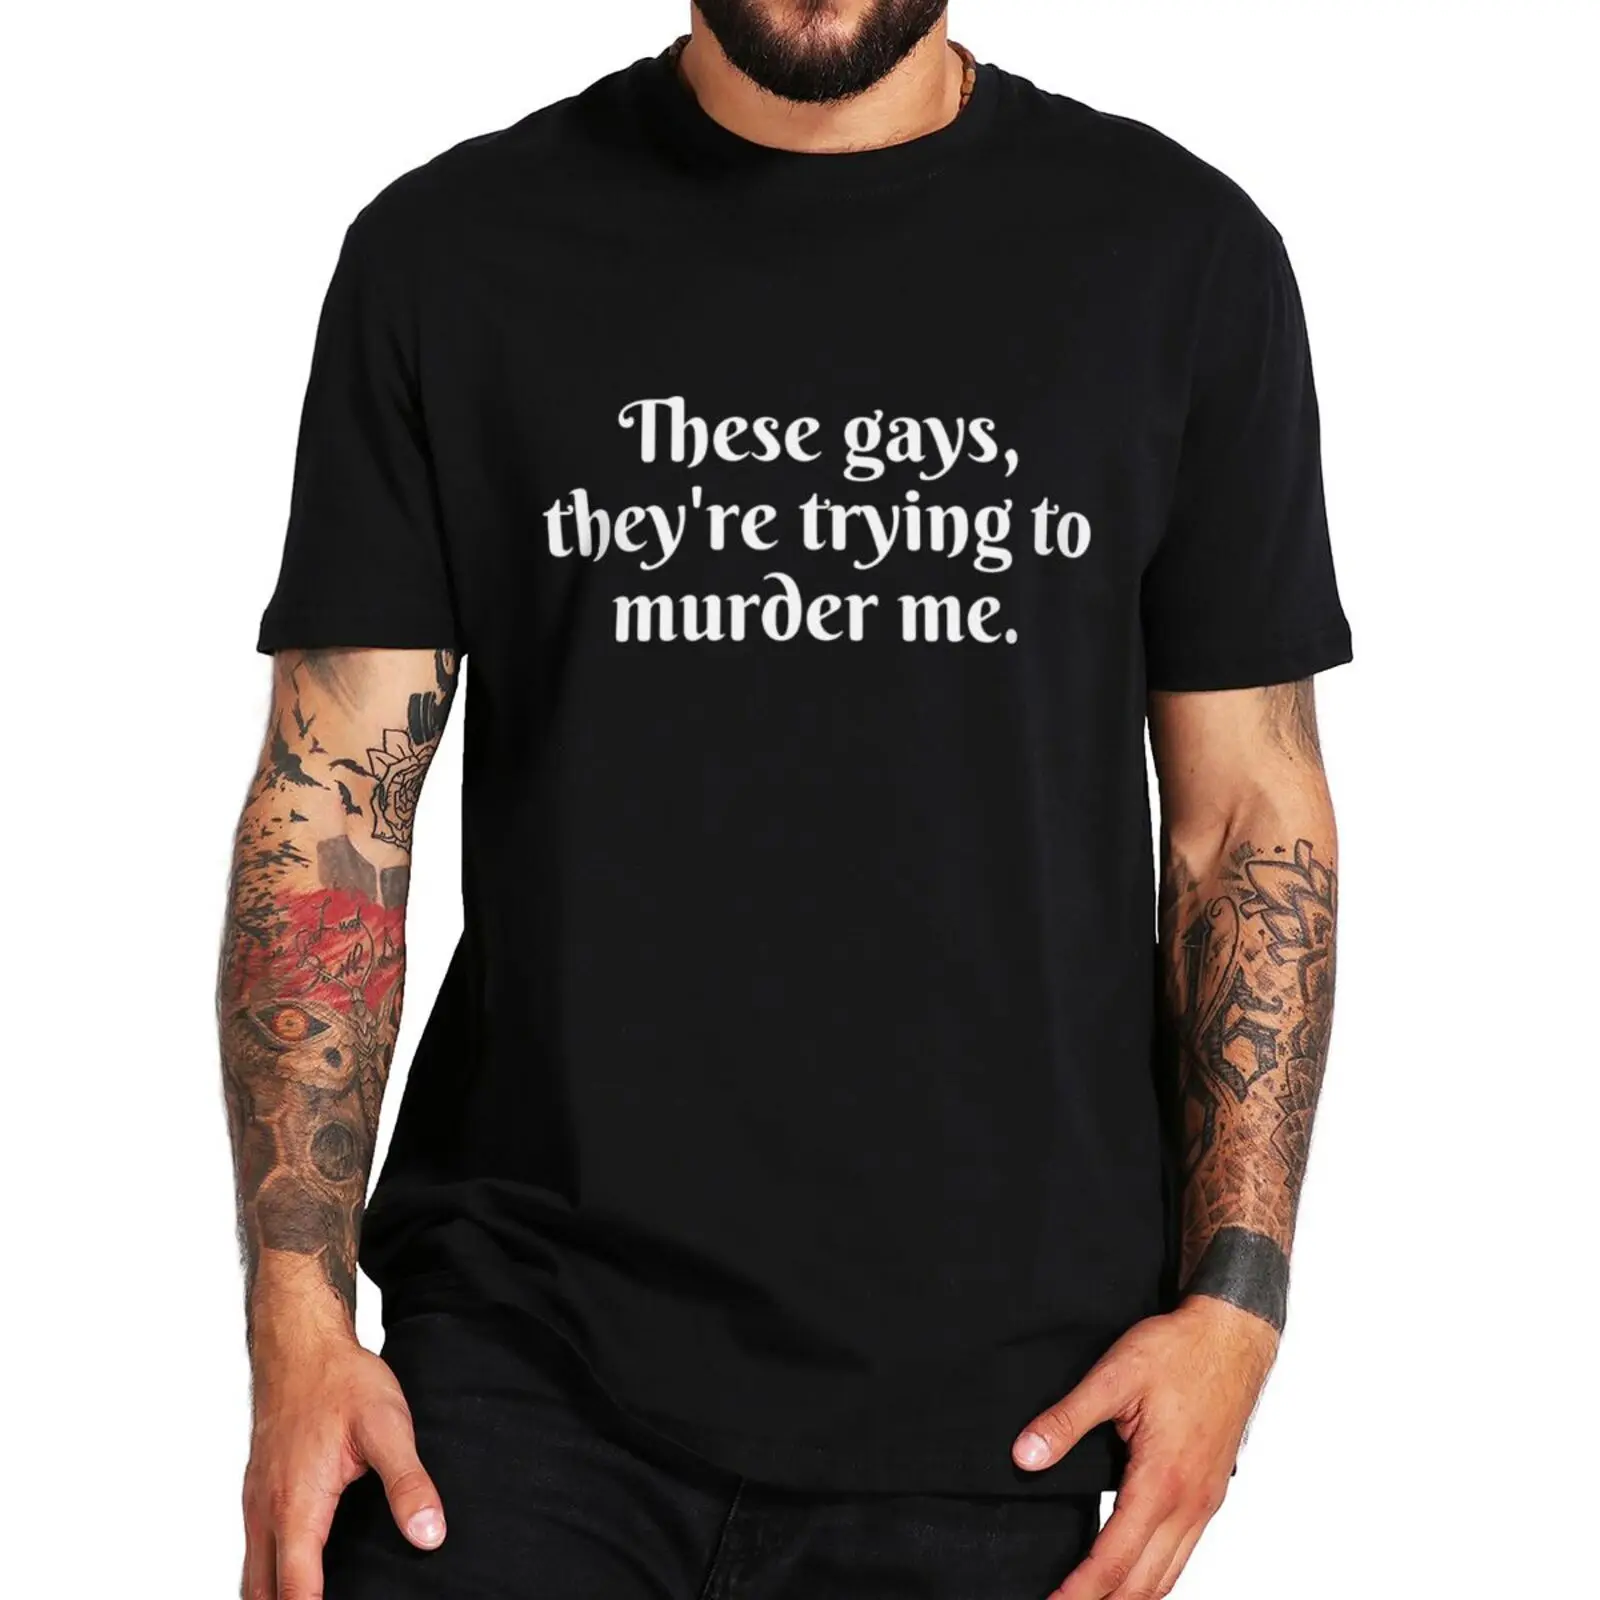 

These Gays They're Trying To Murder Me T Shirt Funny TV Series Meme Fans Gift Tee Tops Casual 100% Cotton Unisex T-shirt EU Size